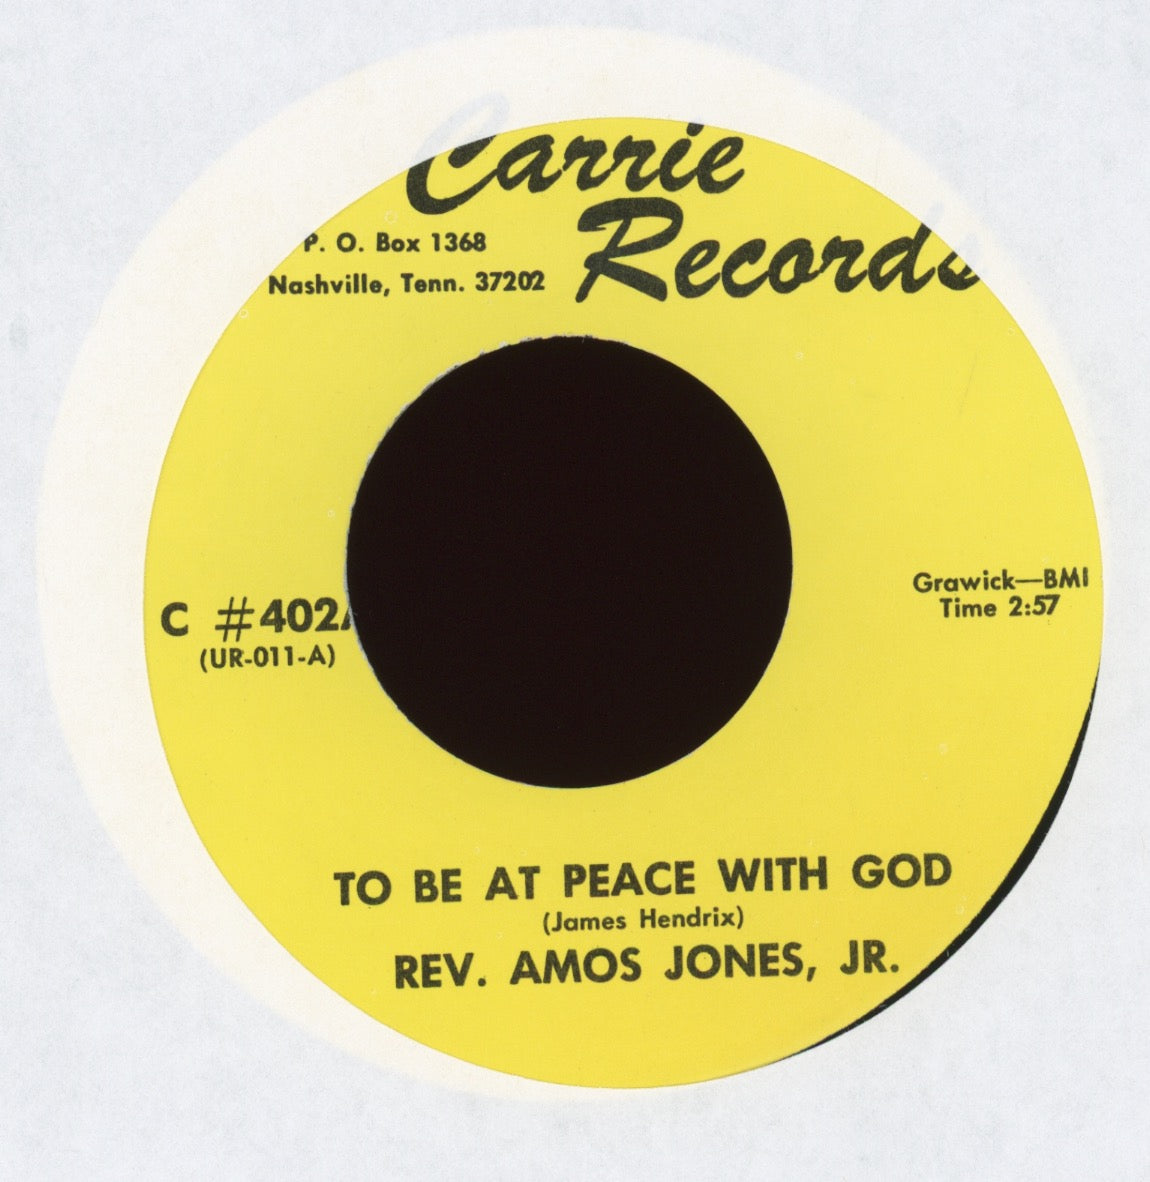 Rev. Amos Jones, Jr. Westwood Baptist Church - To Be At Peace With God on Carrie Gospel 45